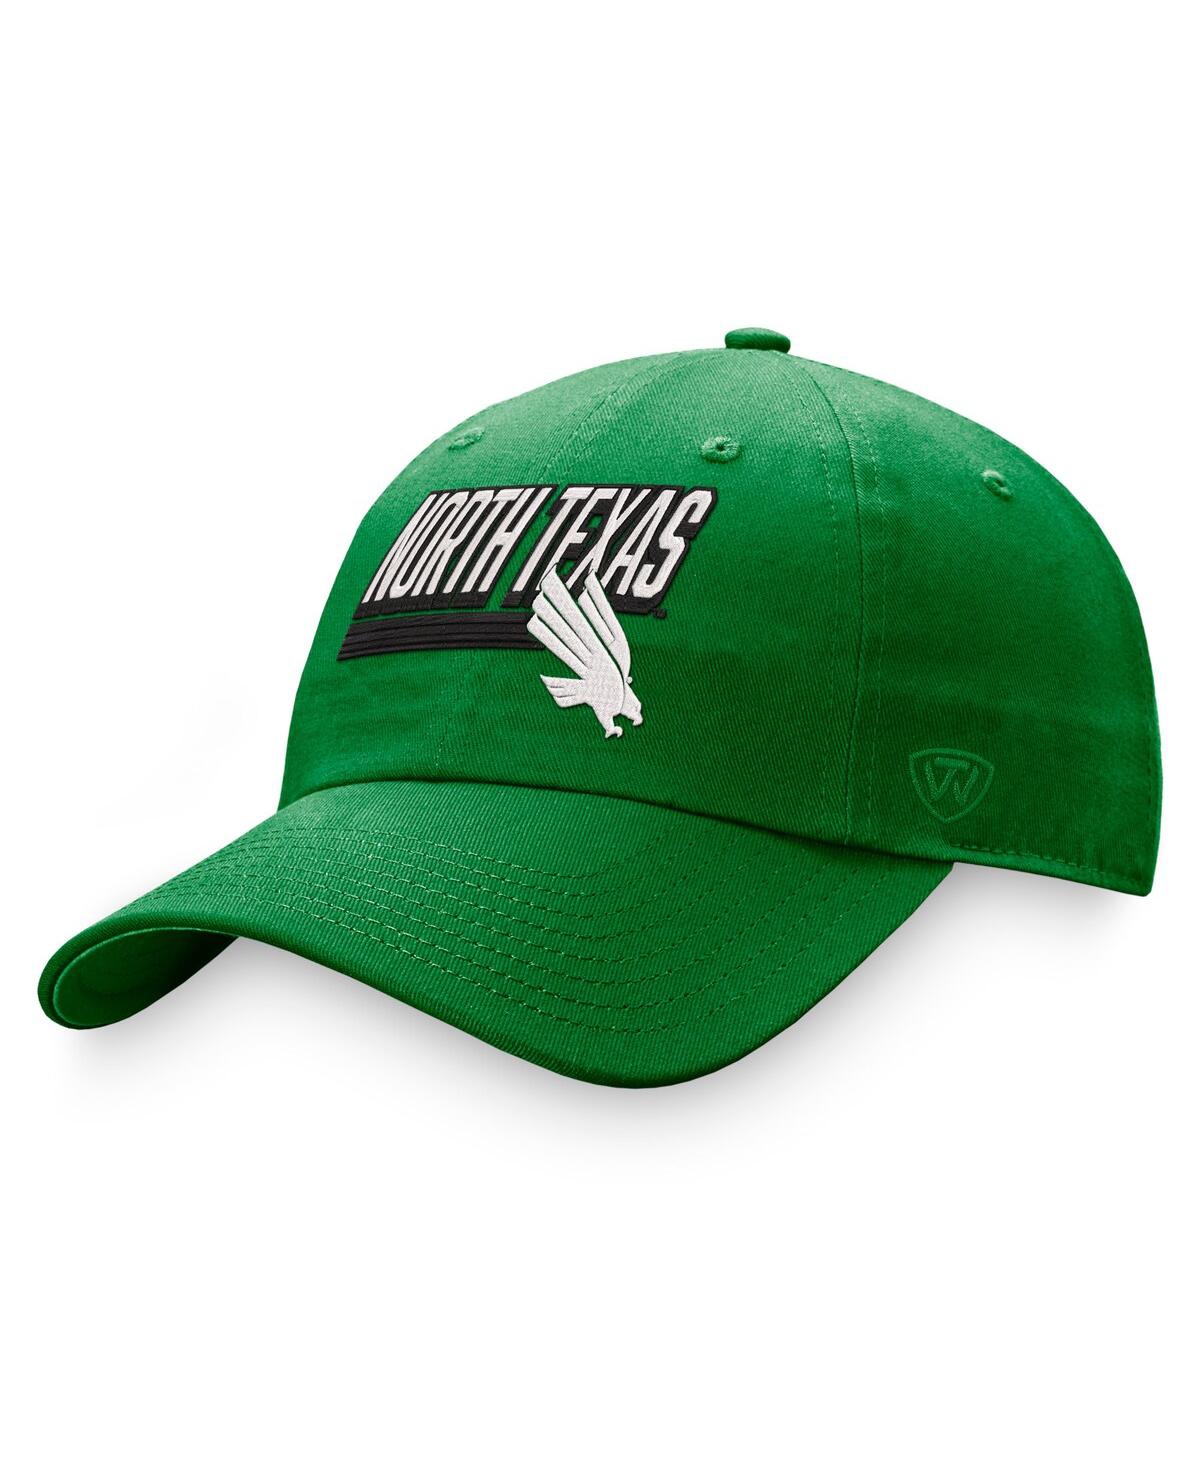 Shop Top Of The World Men's  Green North Texas Mean Green Slice Adjustable Hat